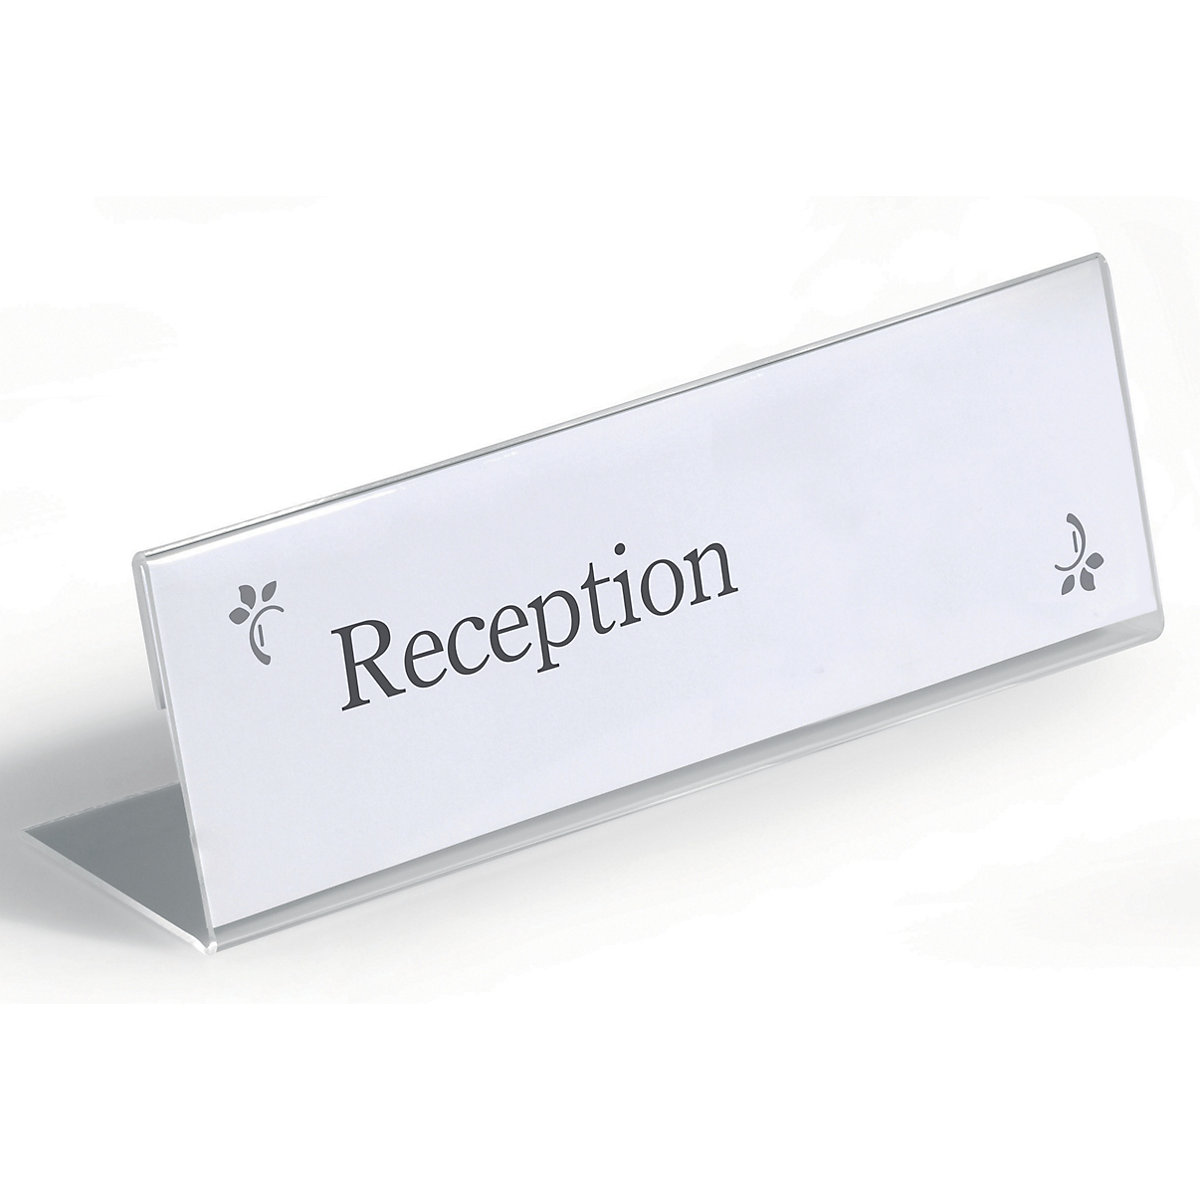 Table place name holder made of acrylic – DURABLE